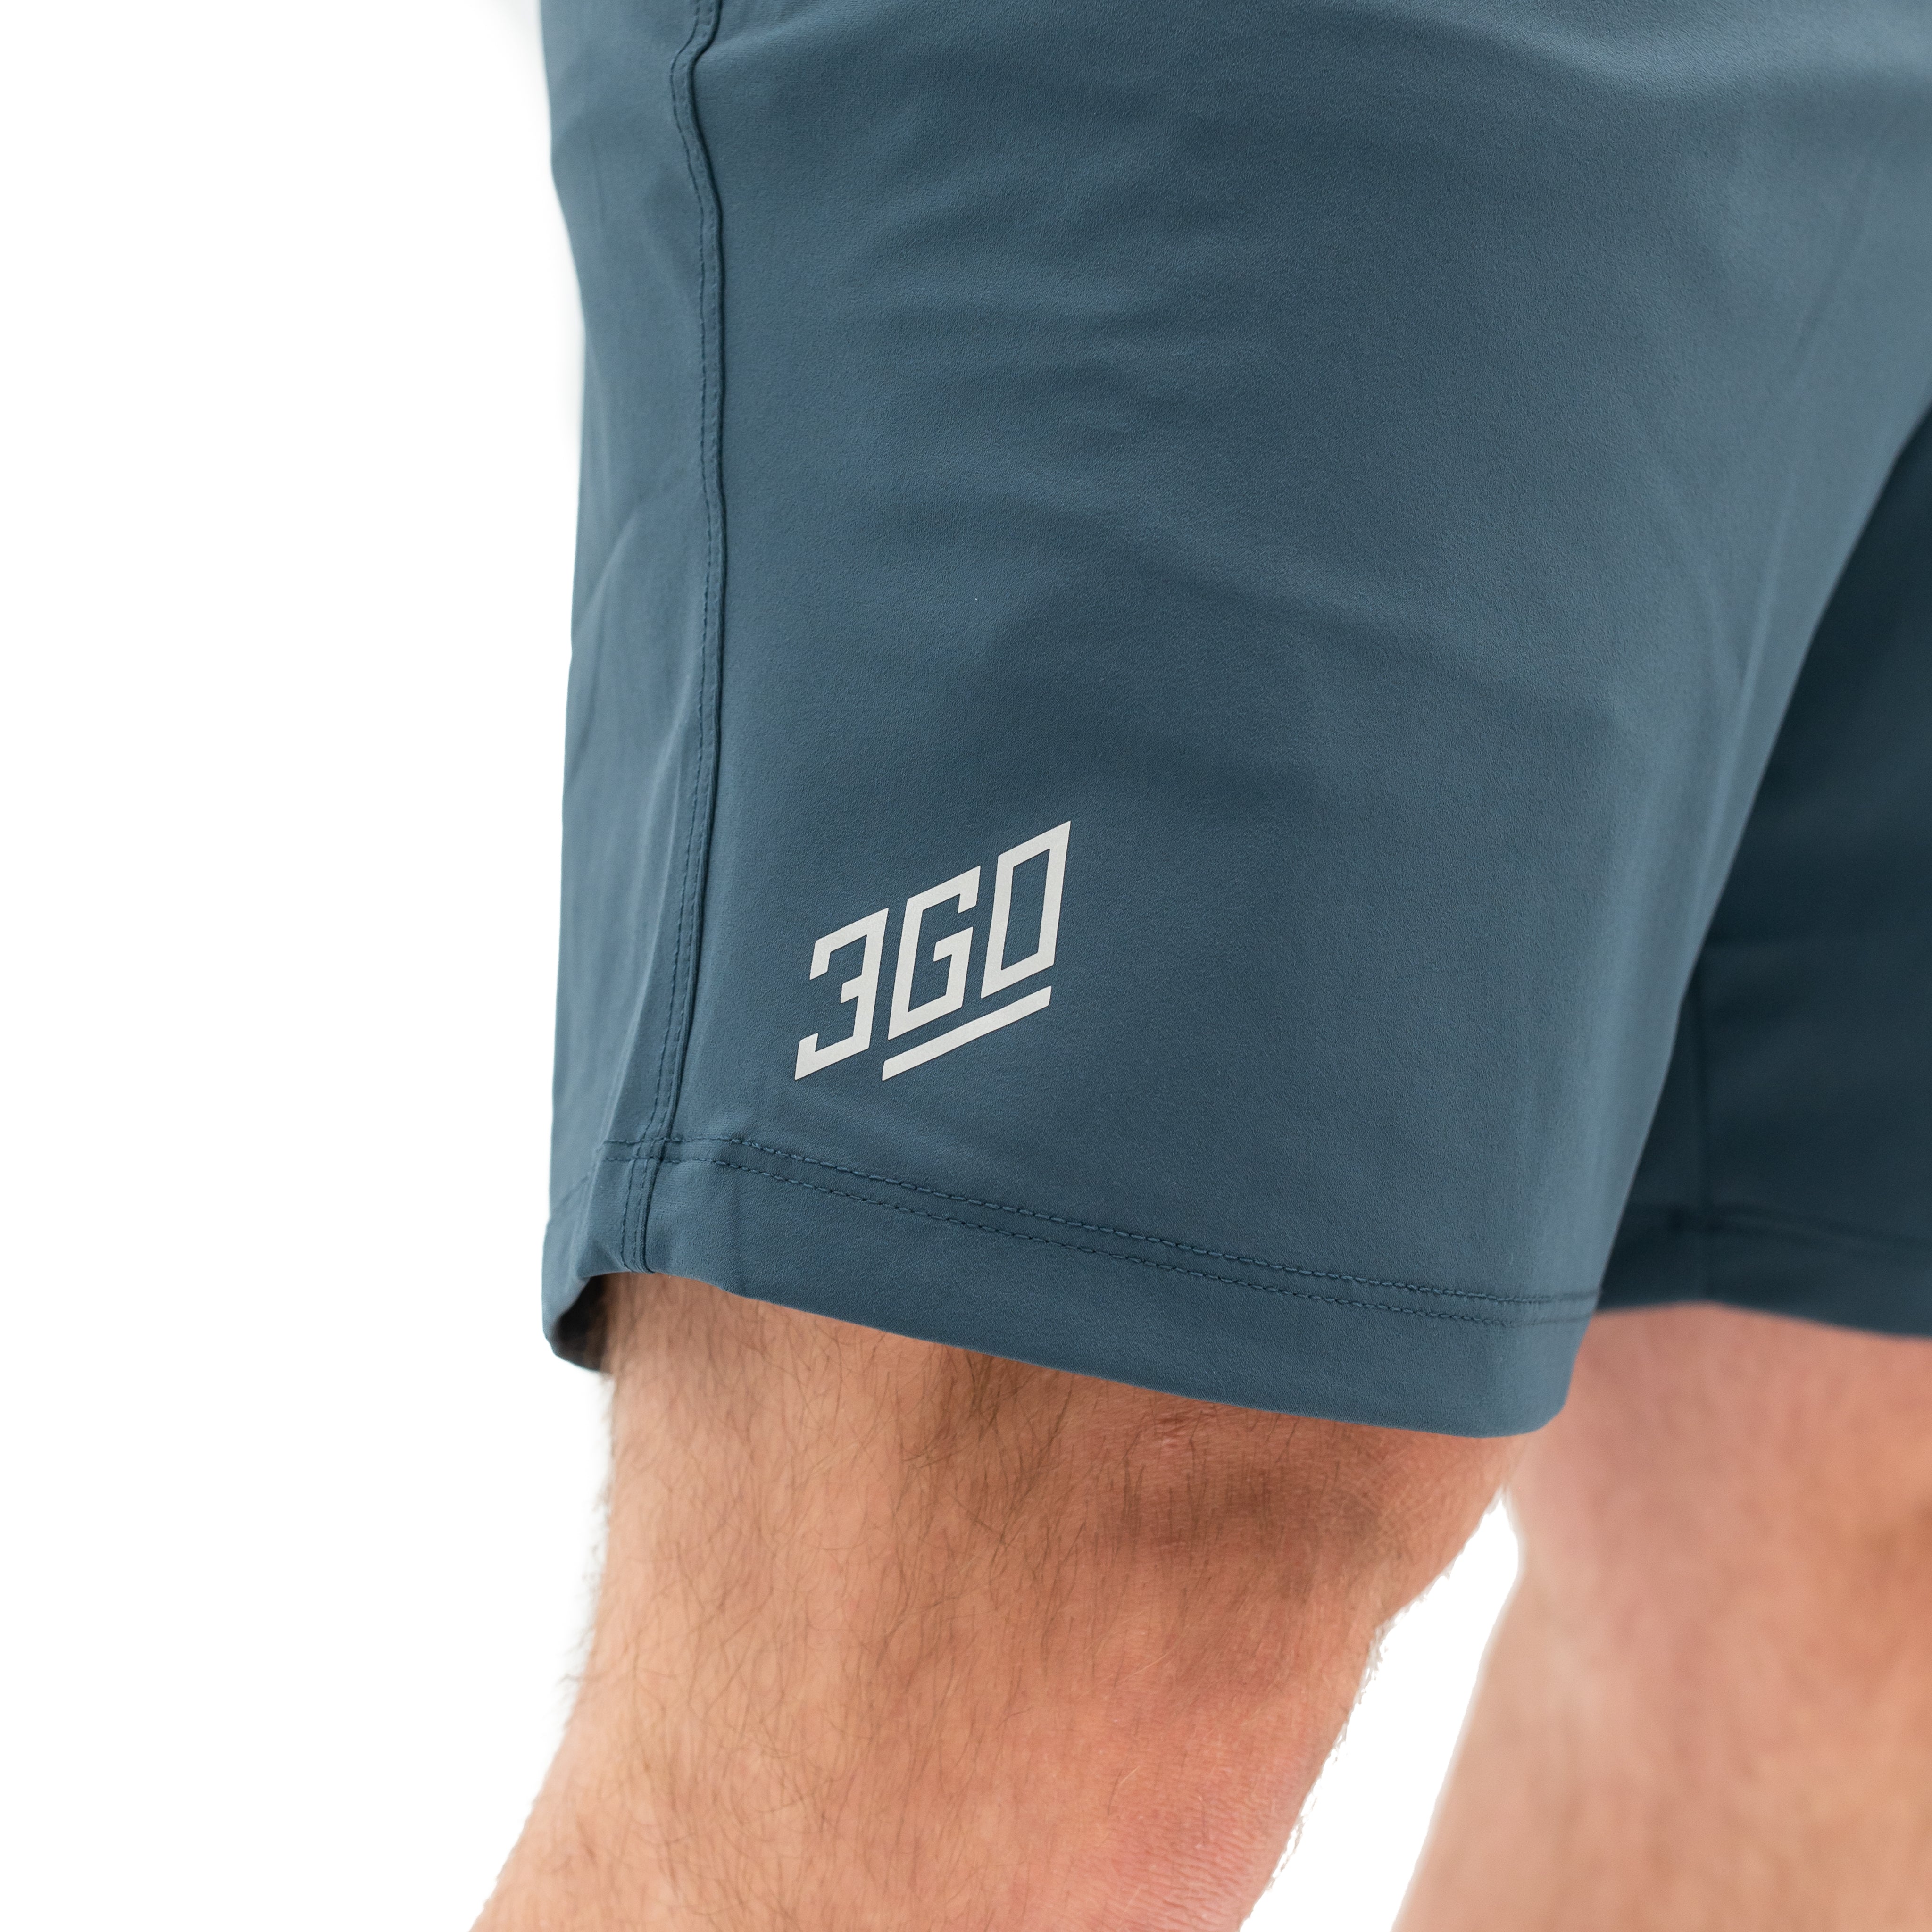 Steel 360-GO shorts were created to provide the flexibility for all the movements in your training while offering the comfort and fit you have come to love through our Centre Squat shorts. Purchase 360-GO Squat shorts from A7 UK and A7 Europe. 360-GO shorts are perfect for powerlifting and weightlifting training. Available in UK and Europe including France, Italy, Germany, the Netherlands, Sweden and Poland.